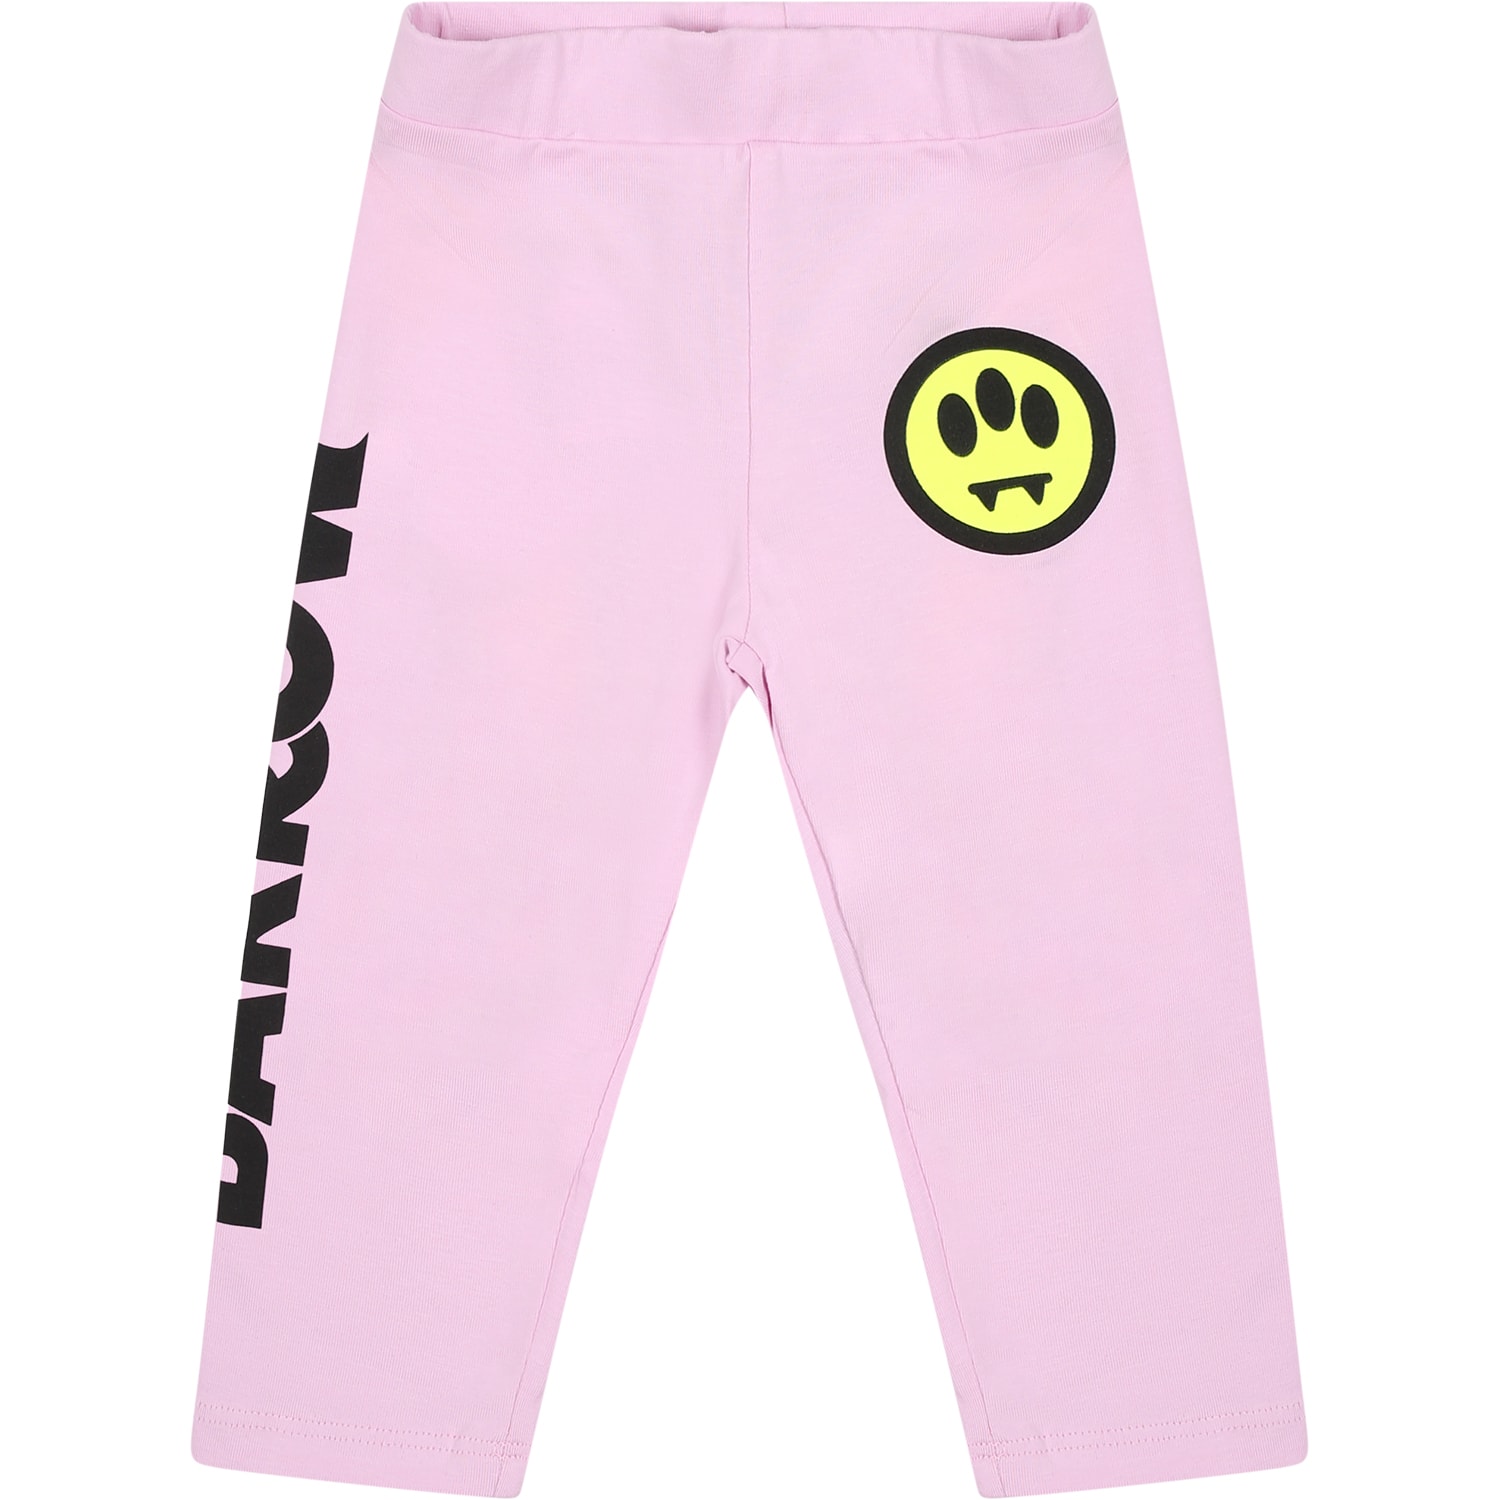 Barrow Pink Leggings For Baby Girl With Smiley Face And Logo